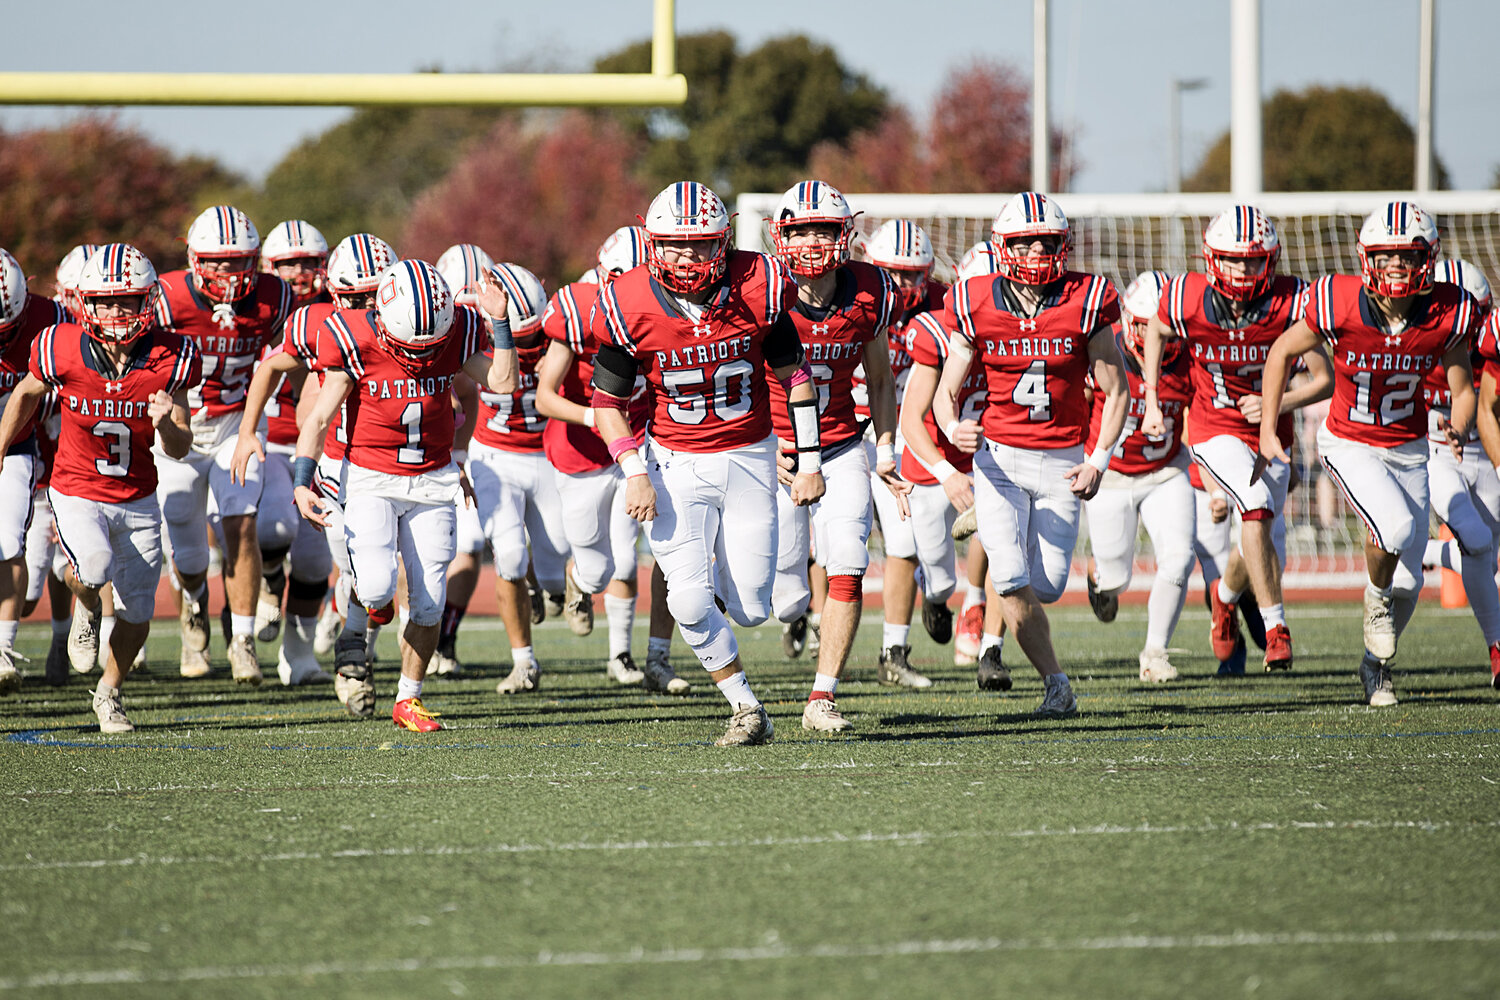 The Patriots take the field at the start of their homecoming game against Cranston East on Saturday.